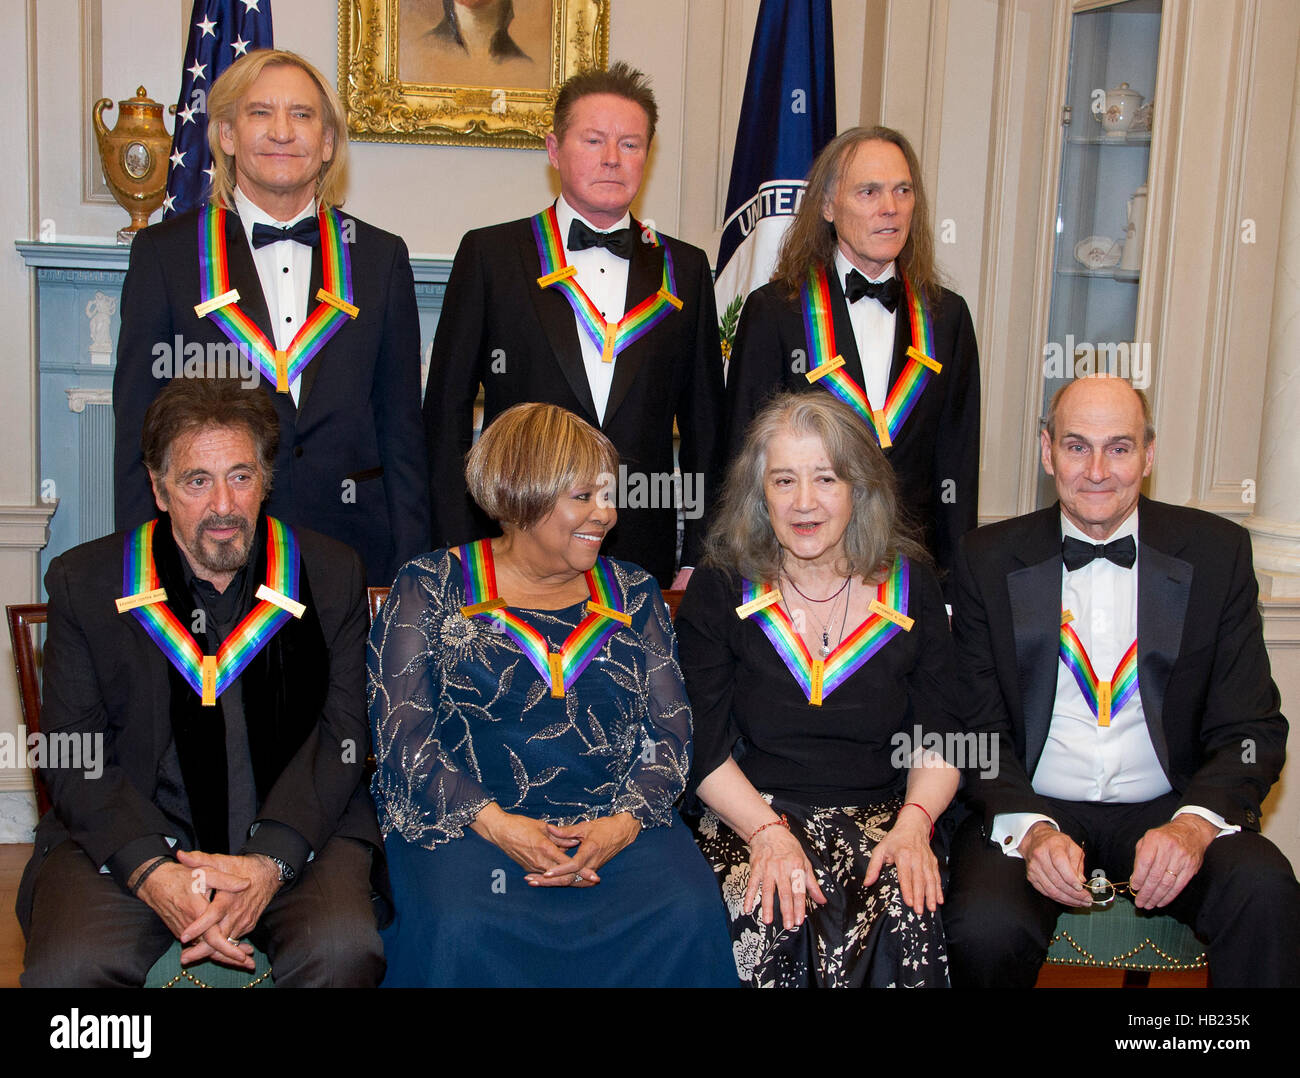 The five recipients of the 39th Annual Kennedy Center Honors pose for a group photo following a dinner hosted by United States Secretary of State John F. Kerry in their honor at the U.S. Department of State in Washington, DC on Saturday, December 3, 2016. From left to right back row: Joe Walsh, Don Henley, and Timothy B. Schmidt of the rock band "The Eagles." Front row, left to right: Al Pacino, Mavis Staples, Martha Argerich, and James Taylor. The 2016 honorees are: Argentine pianist Martha Argerich; rock band the Eagles; screen and stage actor Al Pacino; gospel and blues singer Mavis Stapl Stock Photo